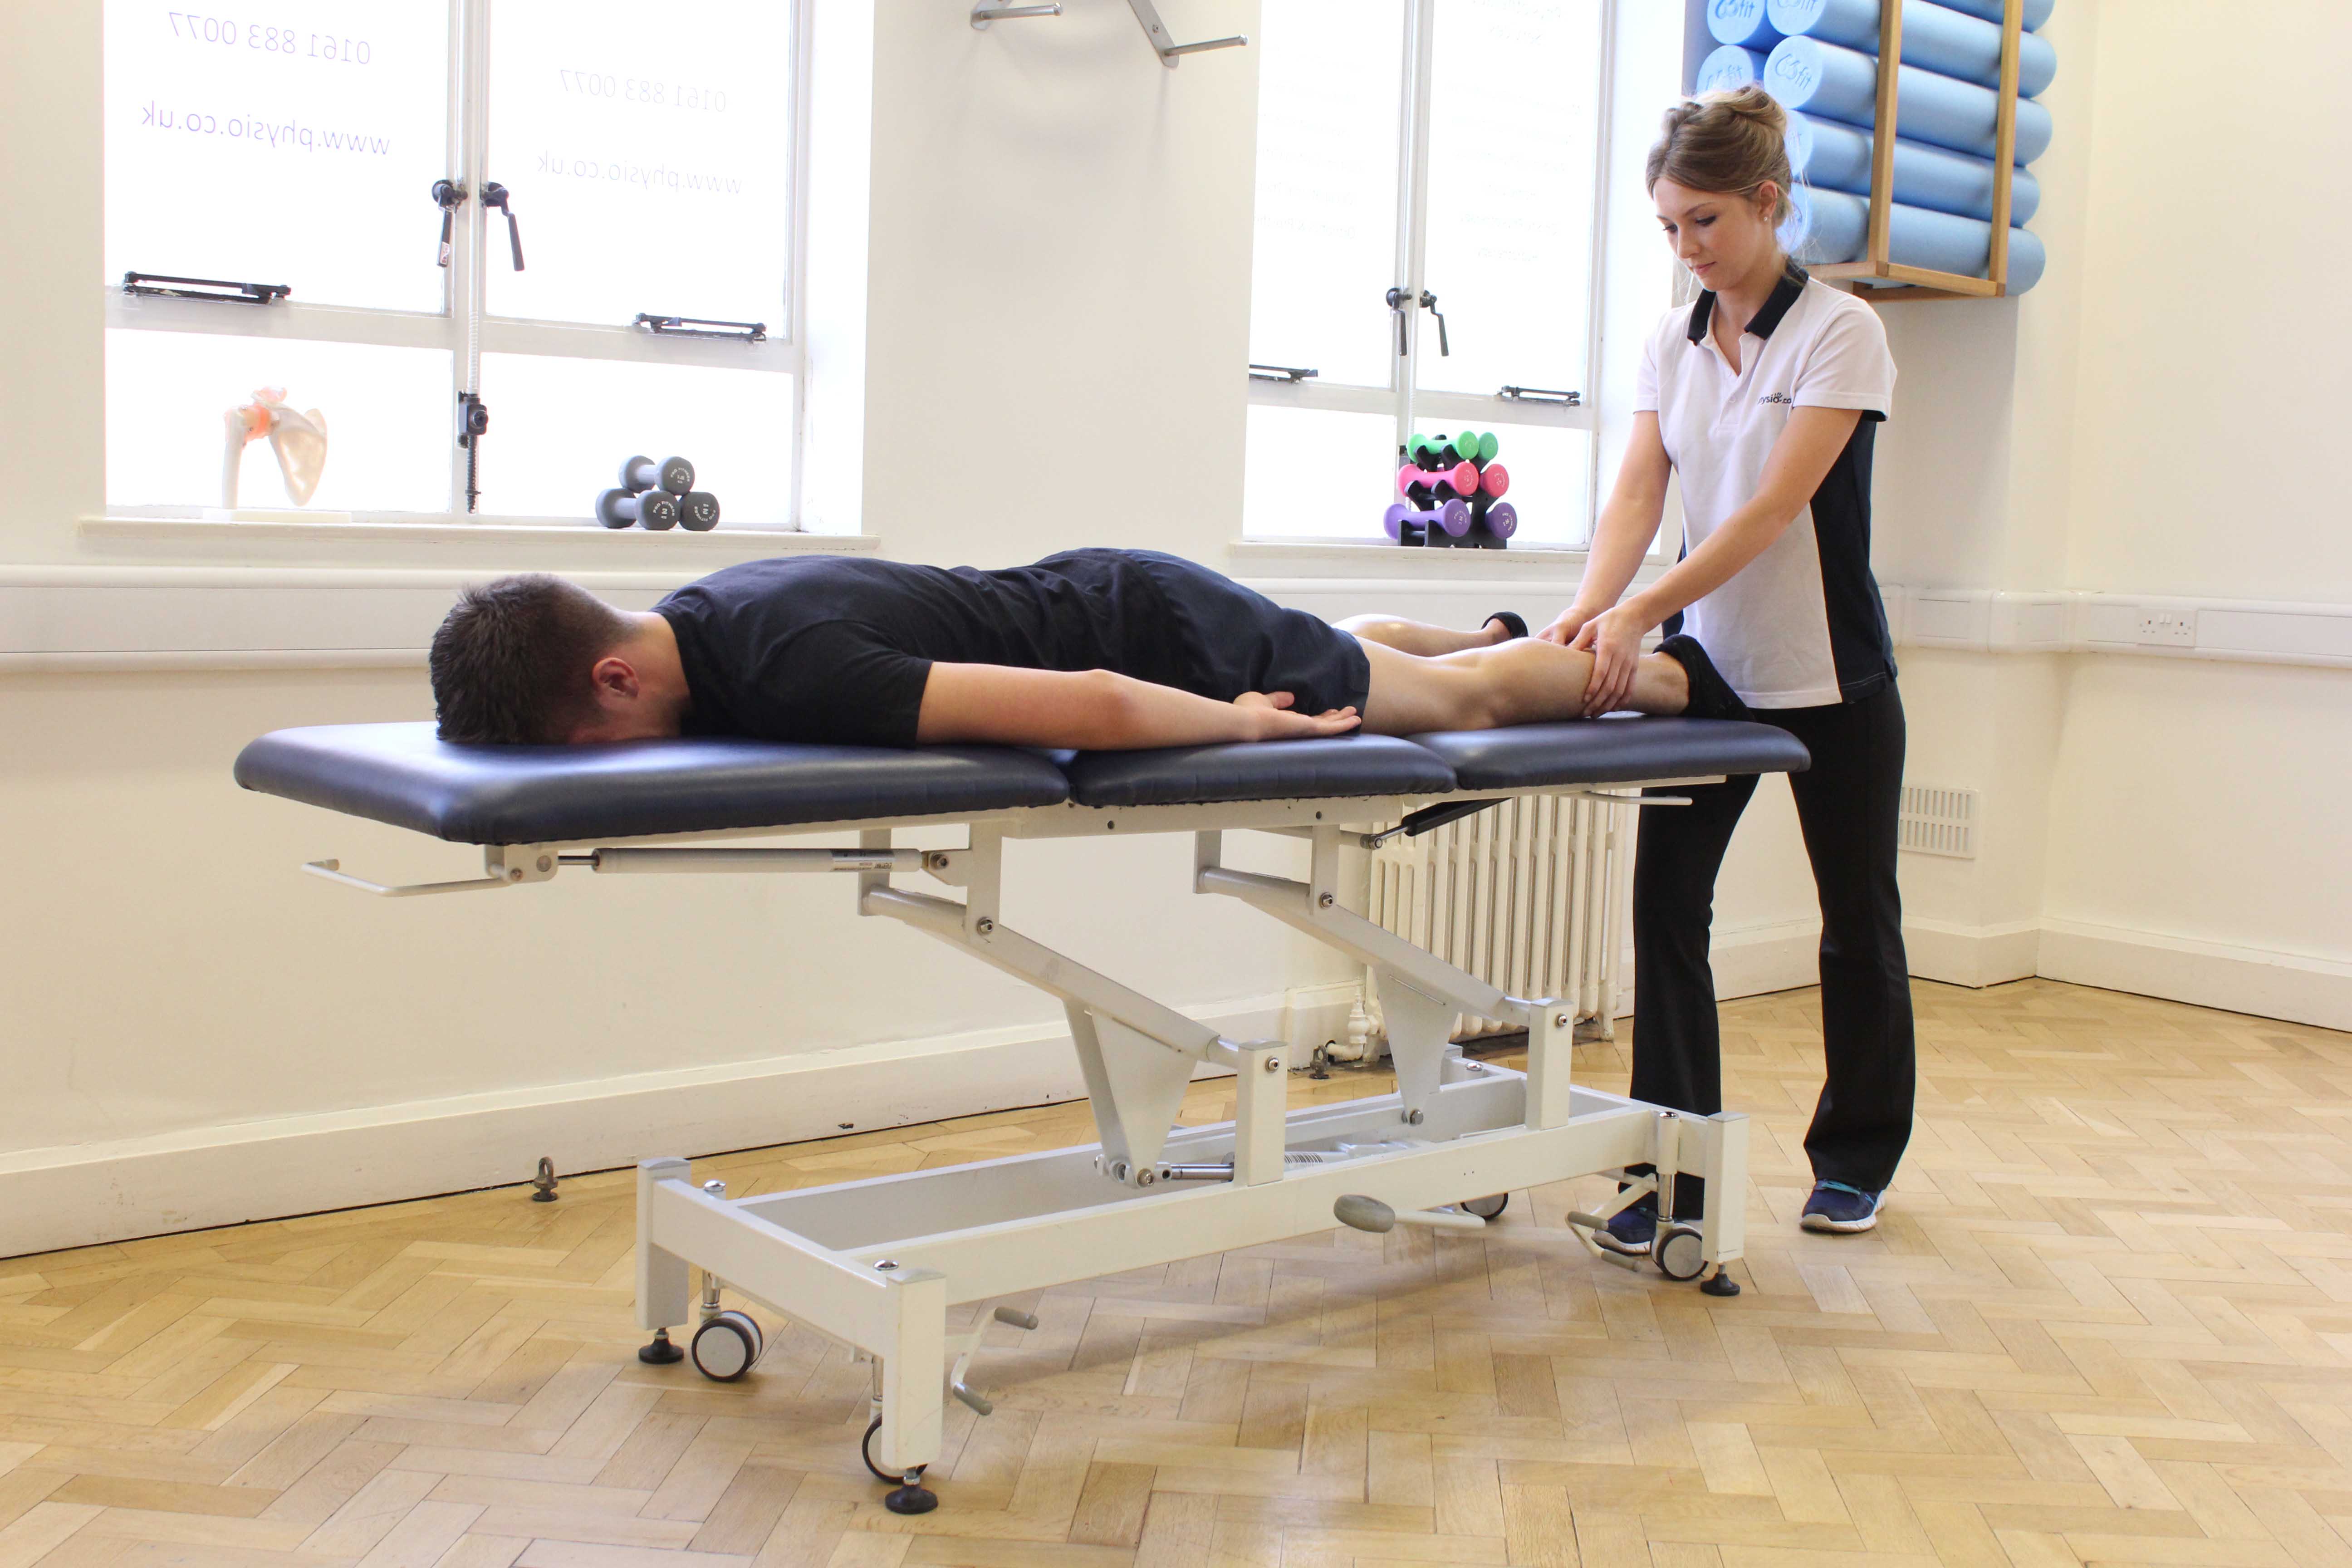 Trigger point massage technique applied to the gastroc nemius muscle to relieve pain and stiffness